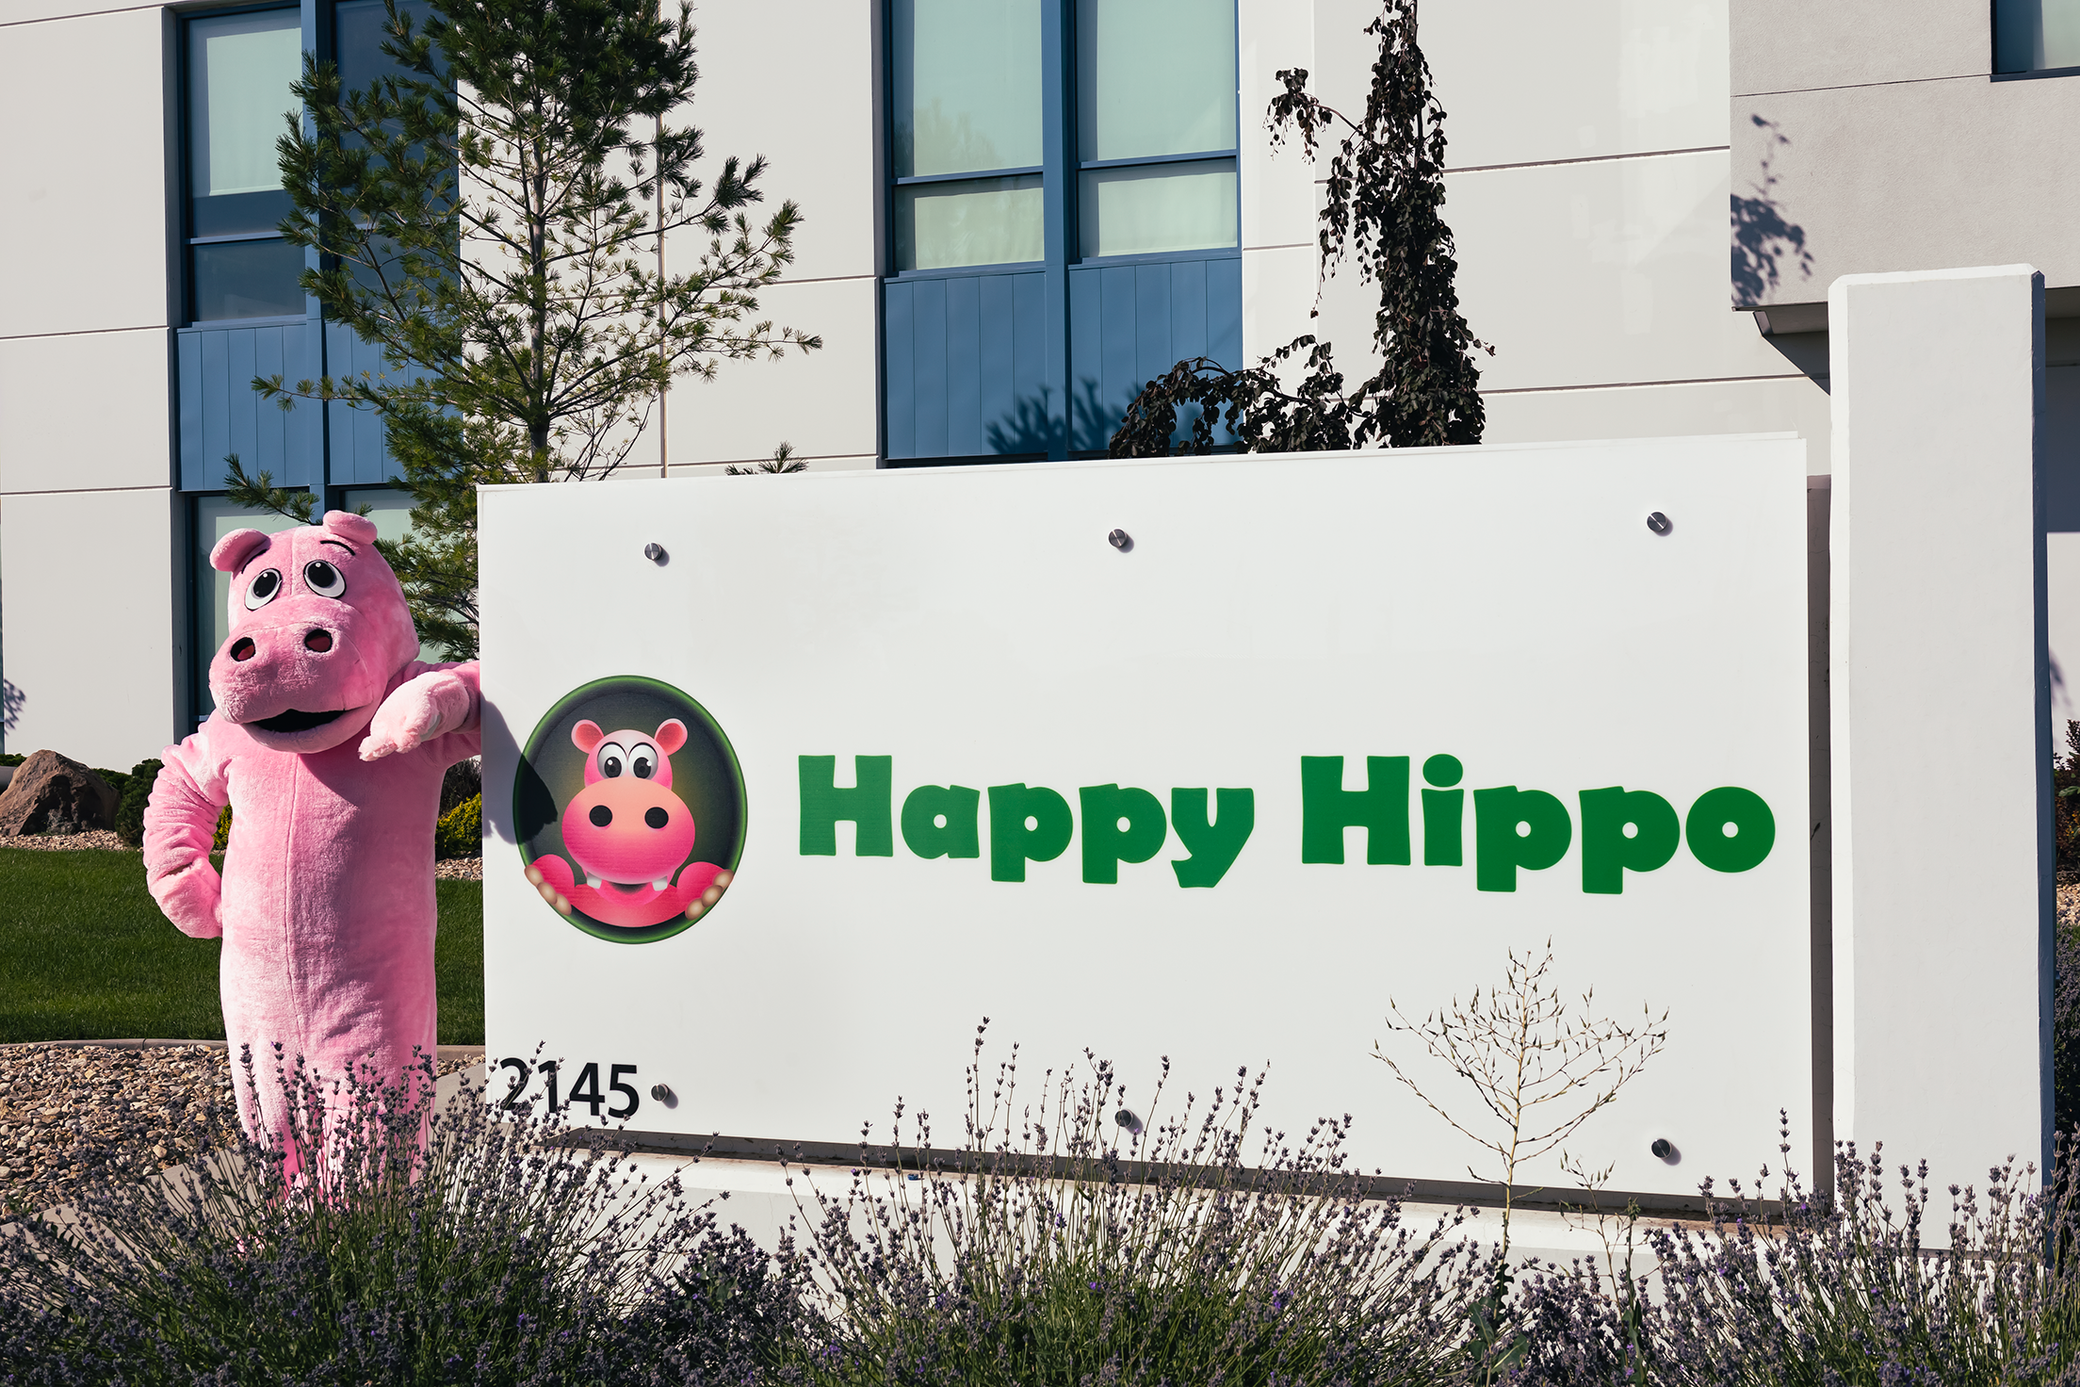 Featured Image depicting Puddles the Hippo character standing next to the sign in front of the Happy Hippo building.